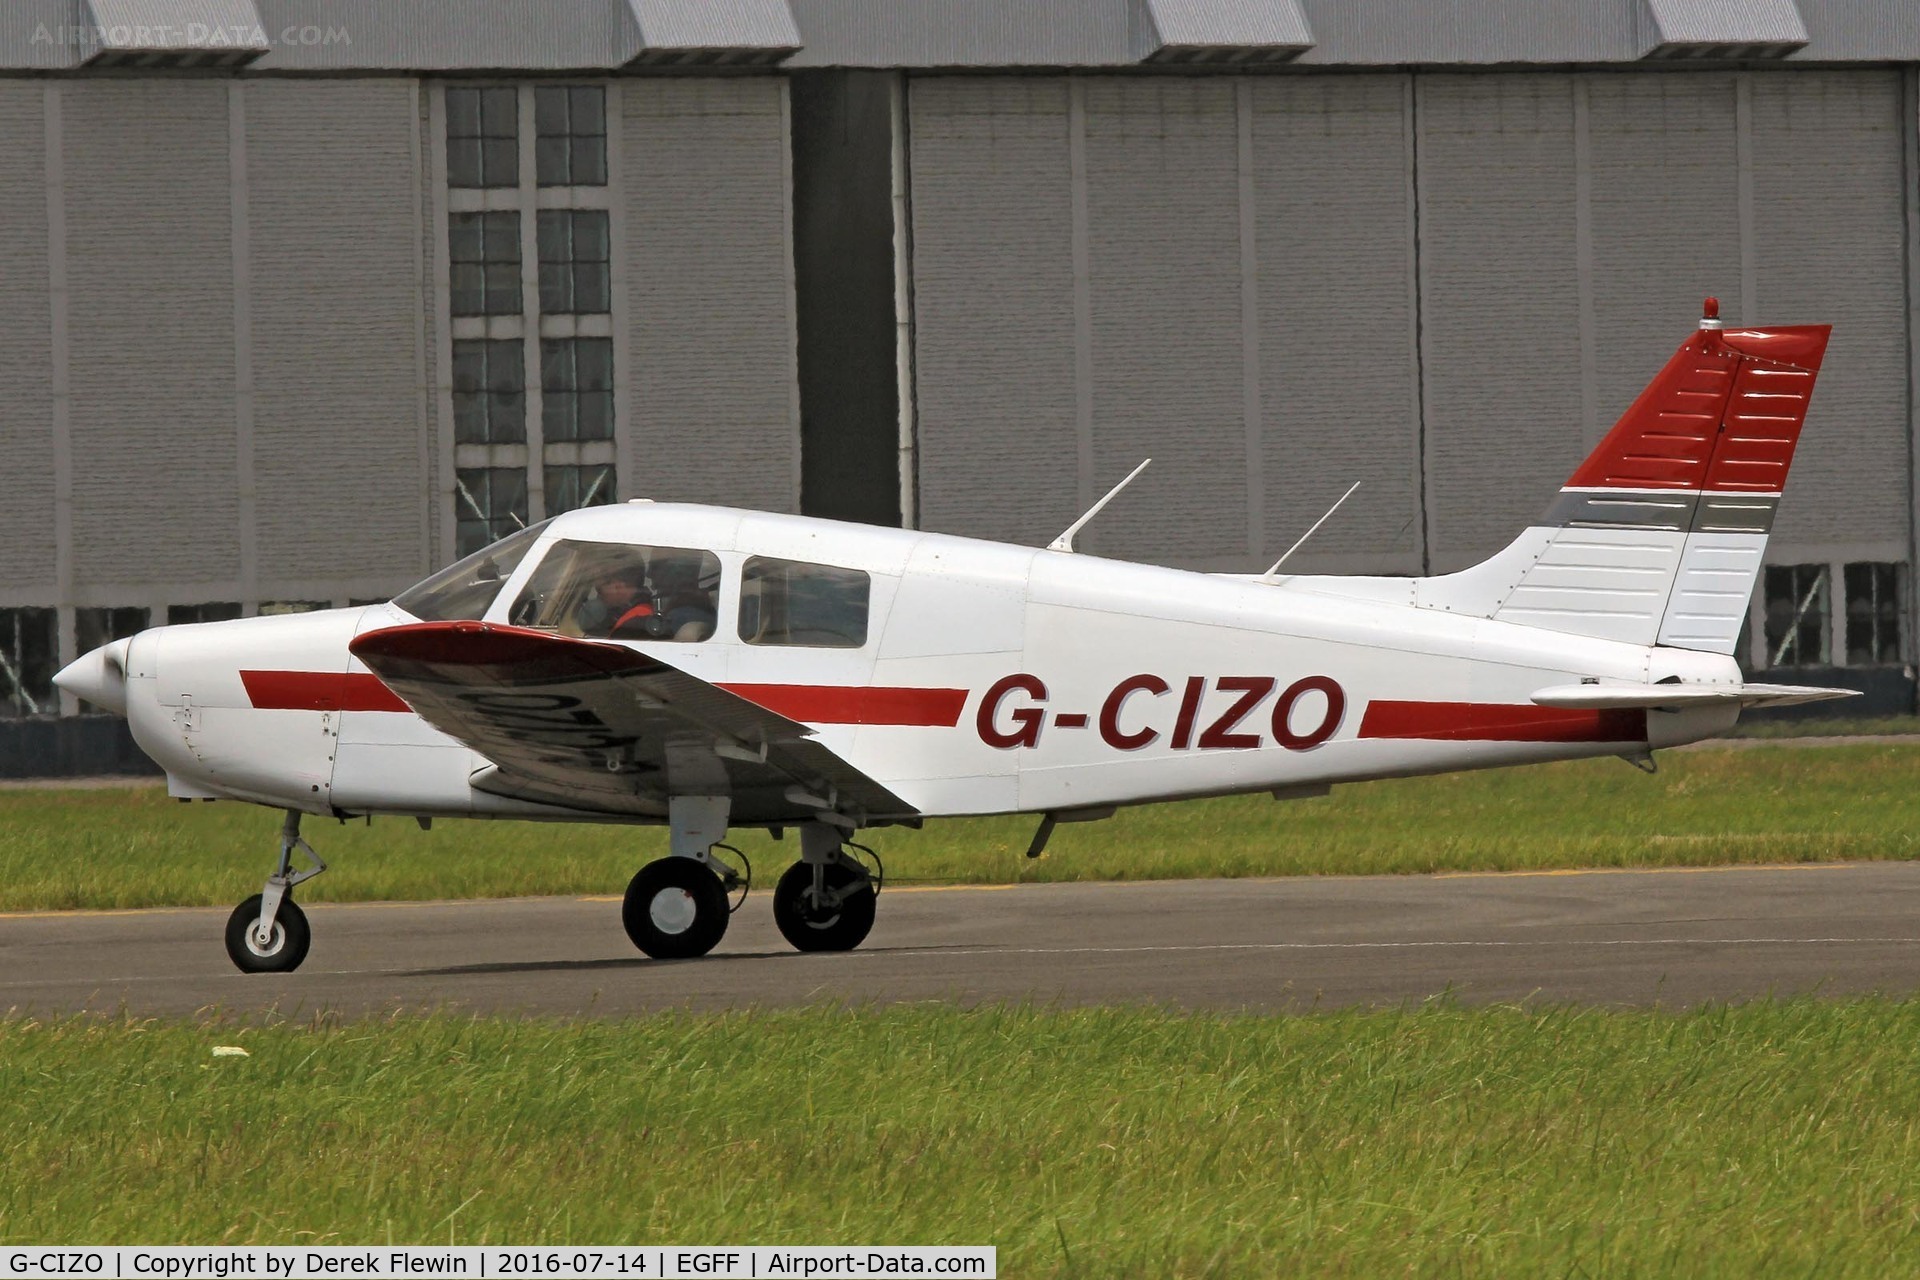 G-CIZO, 1989 Piper PA-28-161 Cadet C/N 2841155, Cadet, Exeter based, previously SE-KII, seen taxxing in.